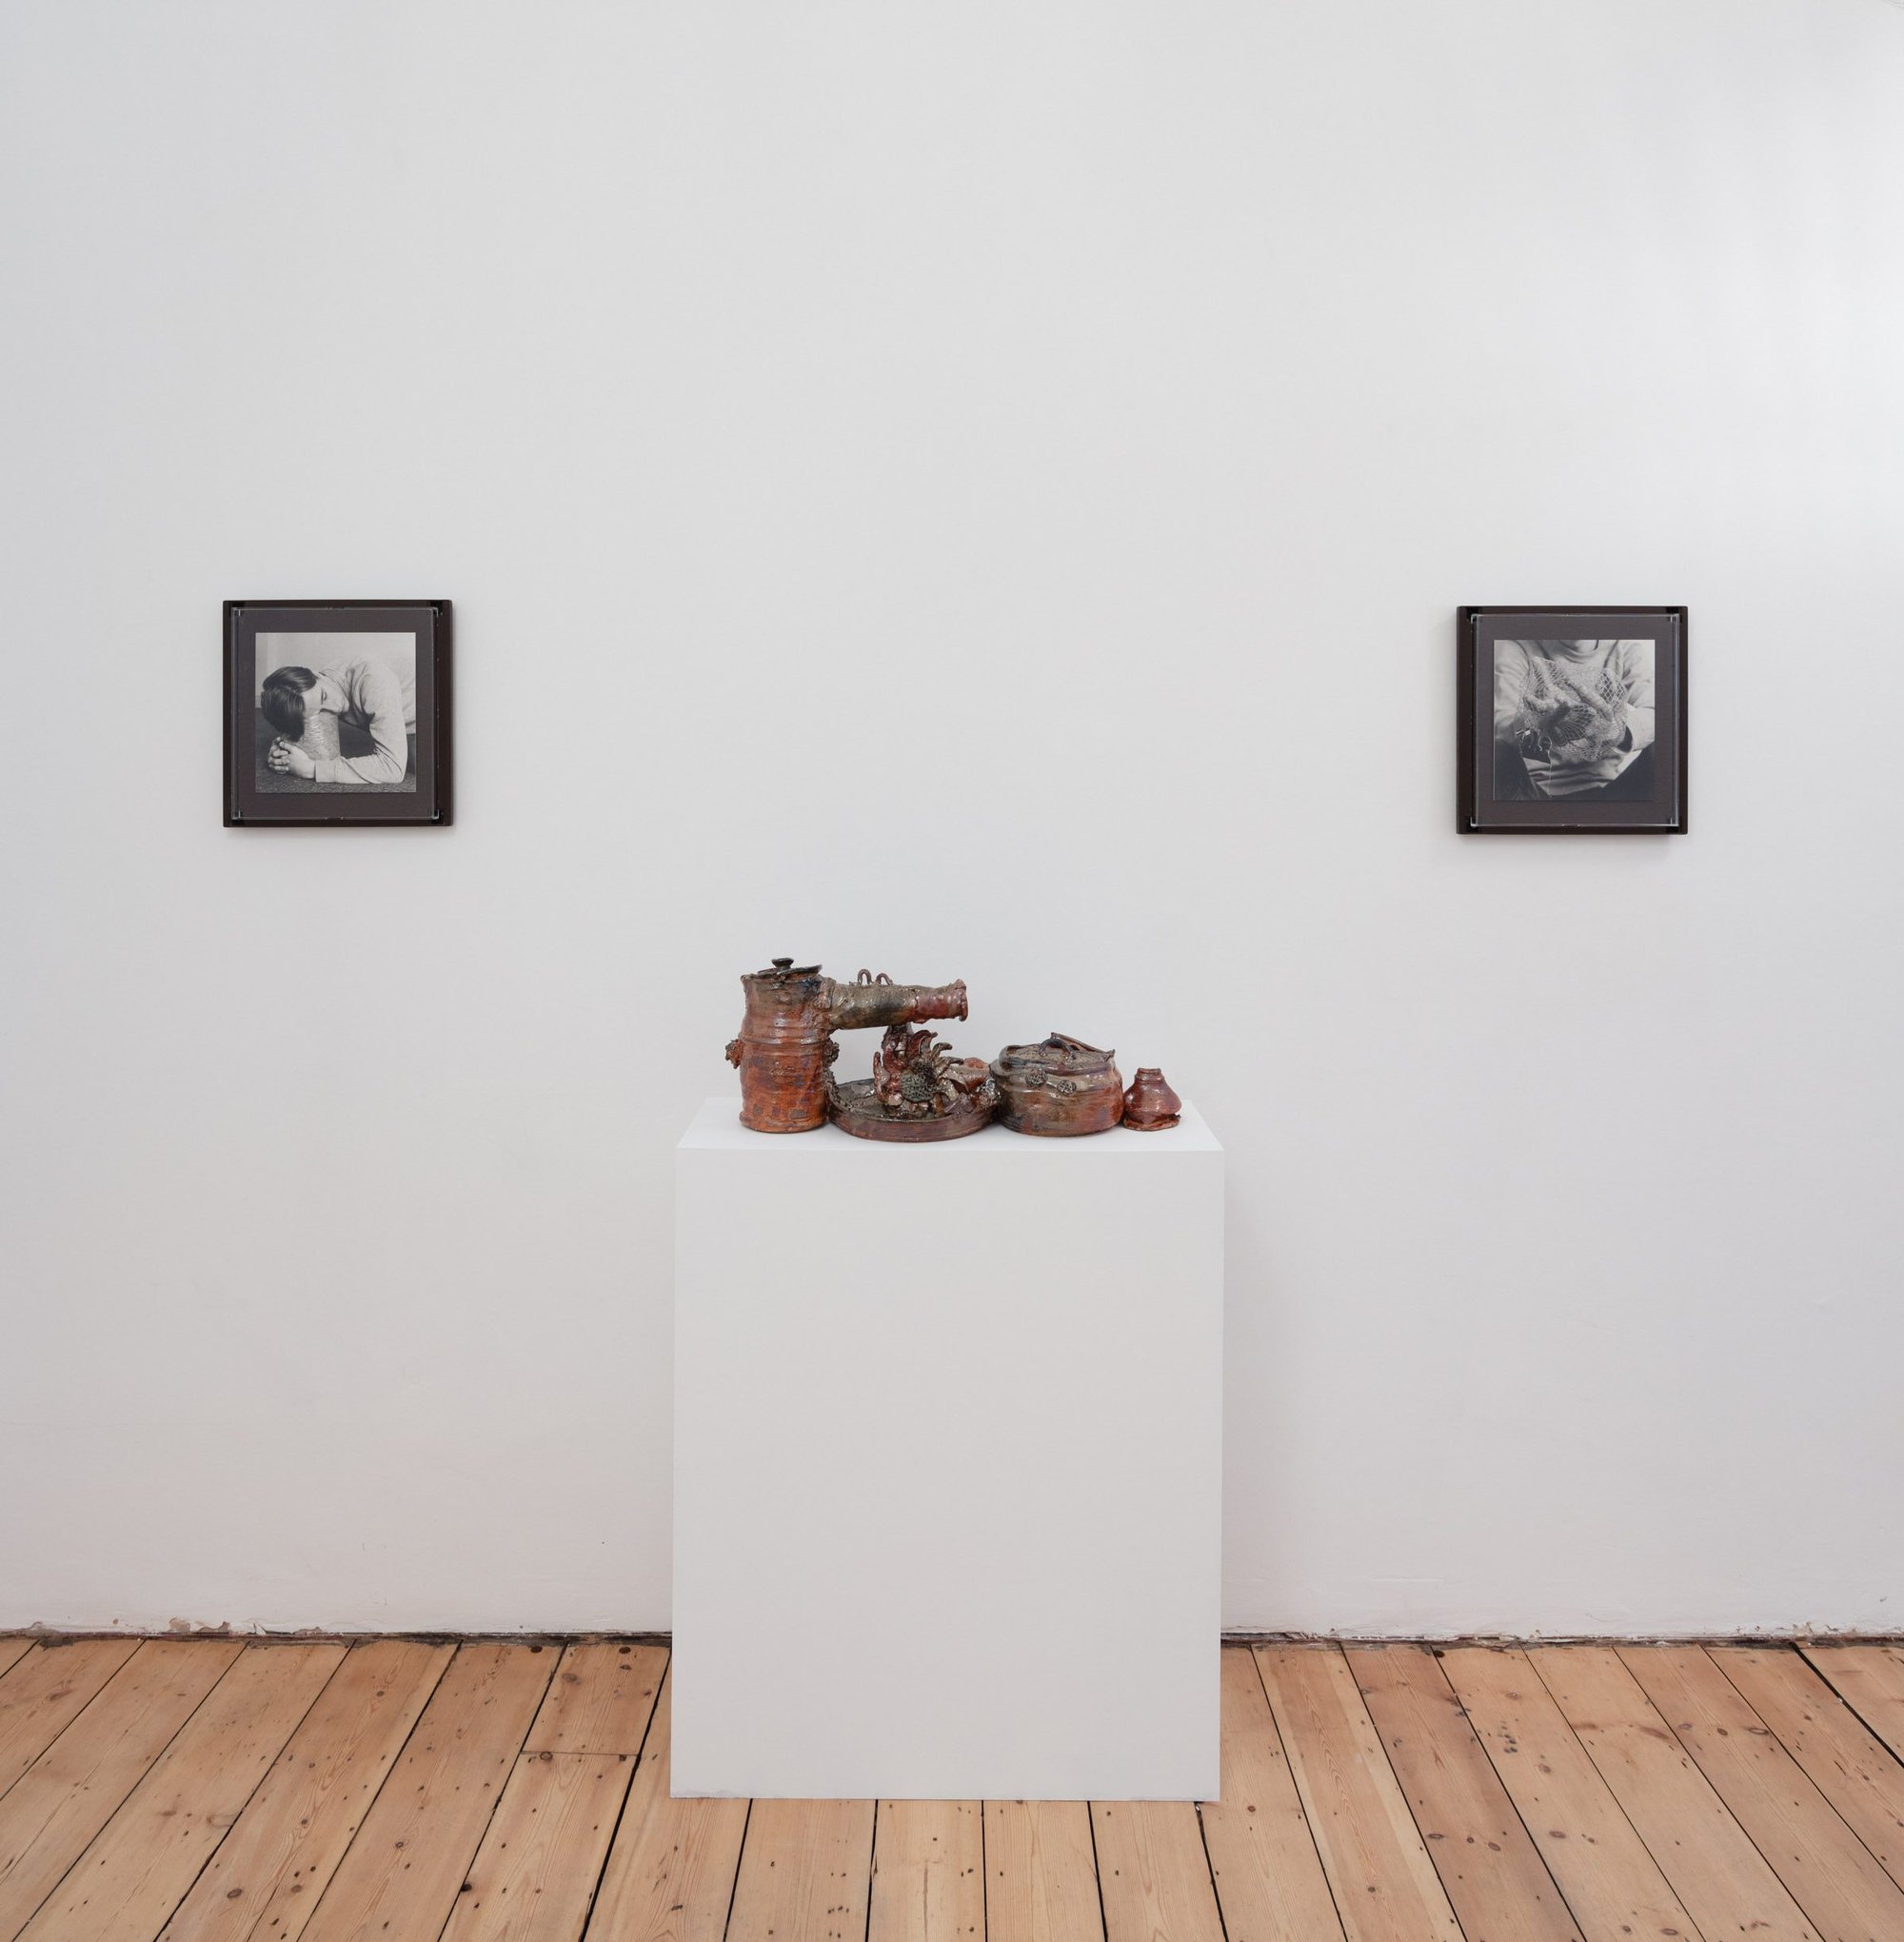 Installation view, Ian Law and Aaron Angell, early monodies, Rodeo, London, 2018